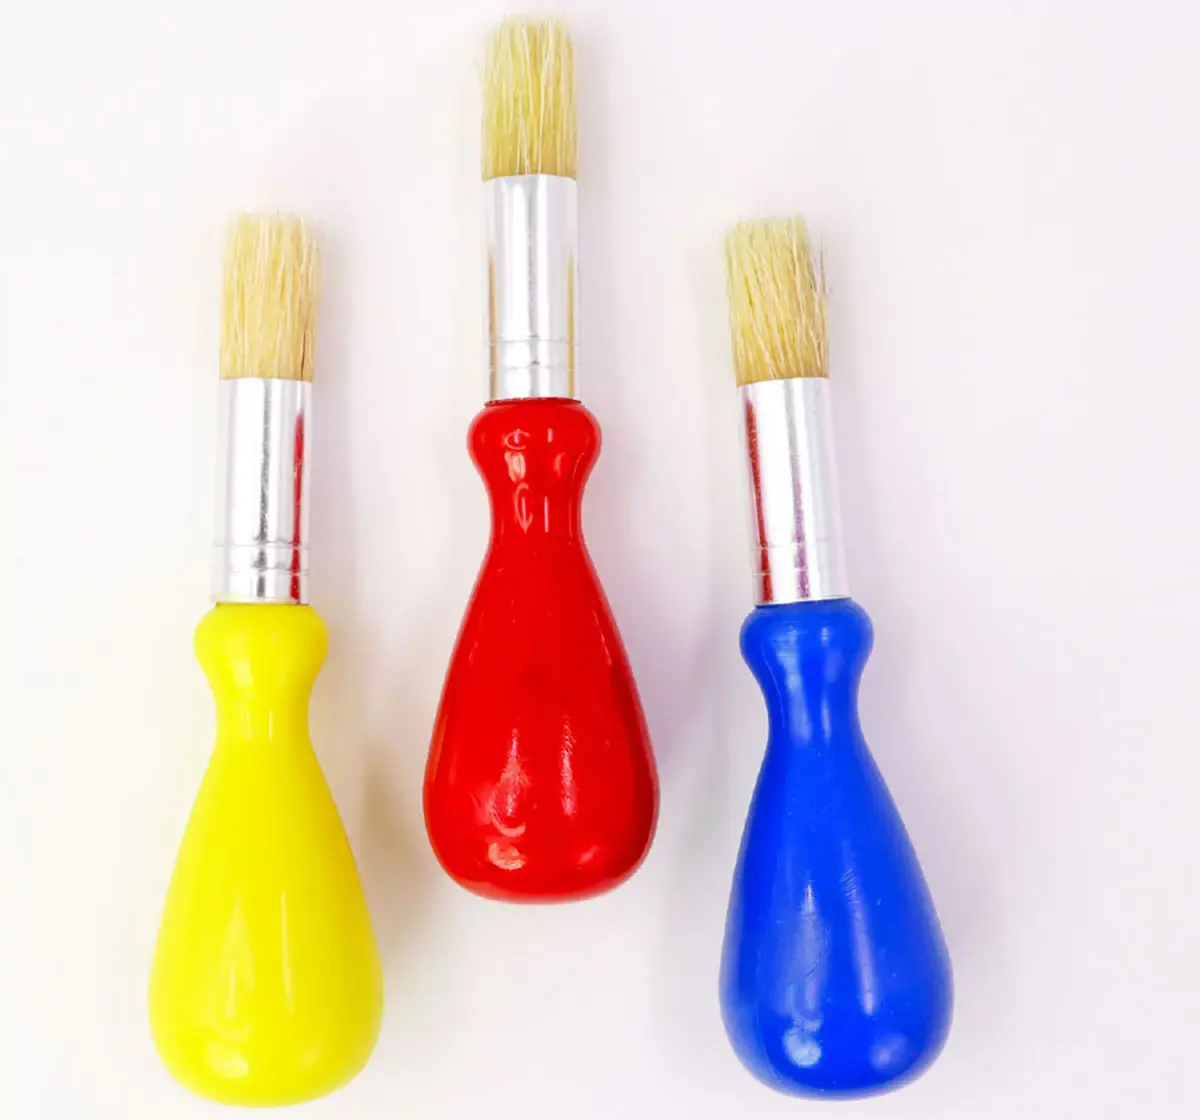 Scoobies Little Fingers Chubby Brushes Set of 3 Multicolour, 4Y+